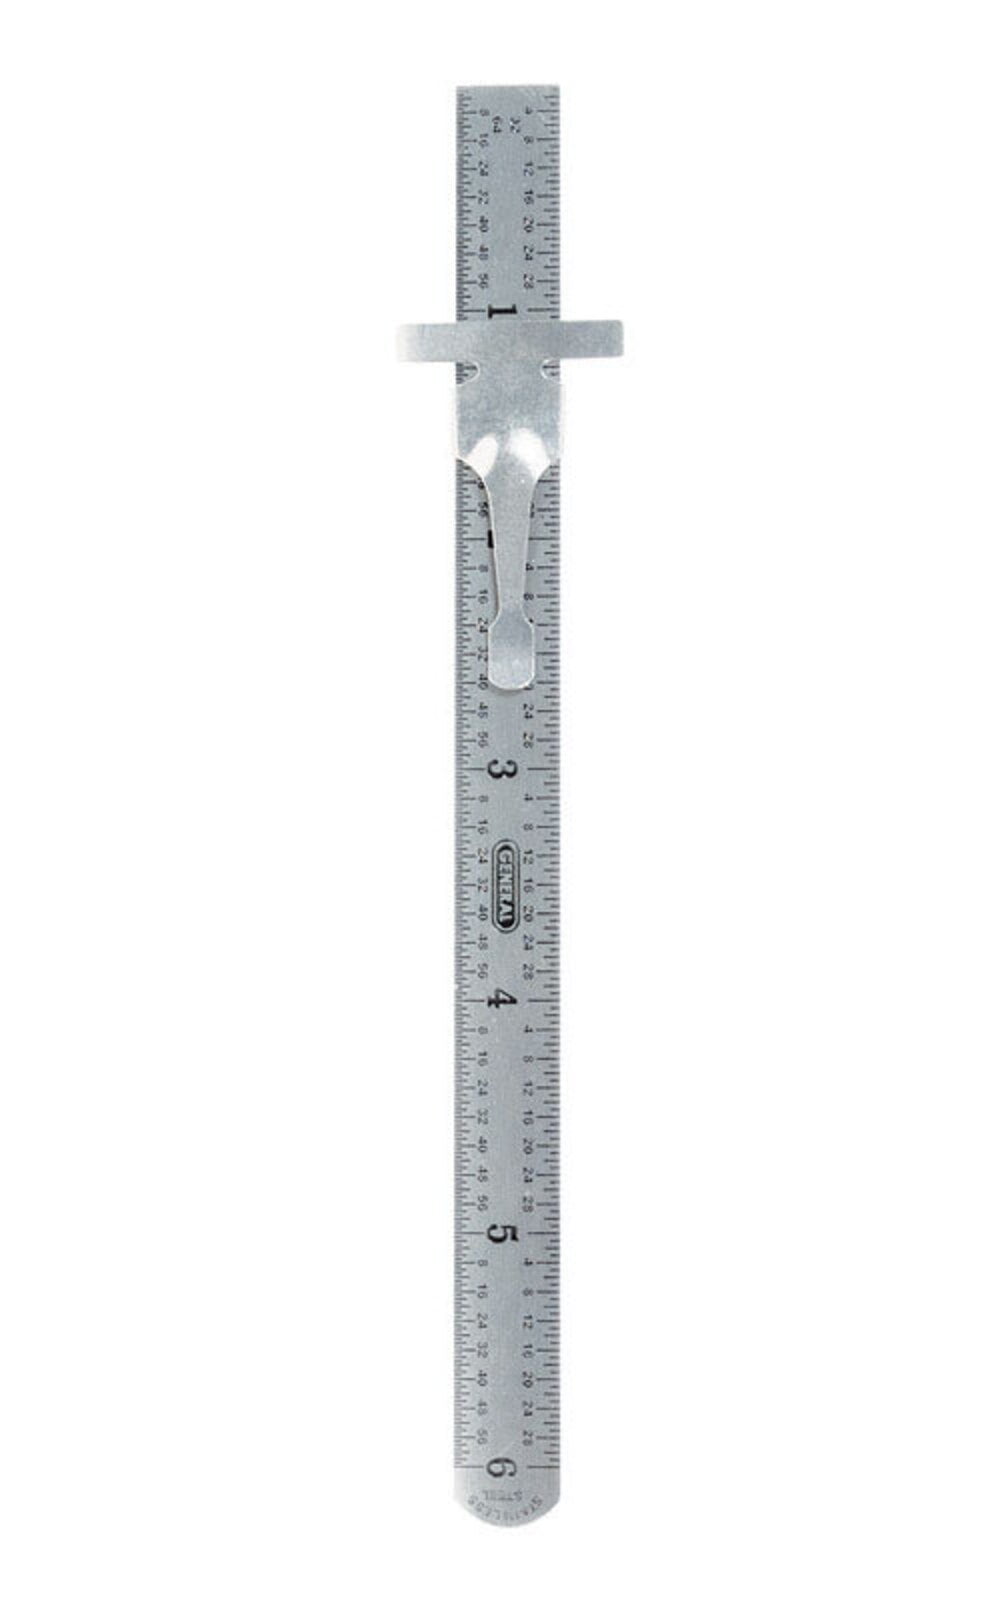  STOBOK 6 Pcs Millimeter Ruler Technical Drawing Ruler Rulers  for Kids Centimeters Ruler Metal Straight Edge Ruler Metal Meter Stick Metal  Ruler 18 Inch Kids Tools Stationary Office Metric : Office Products